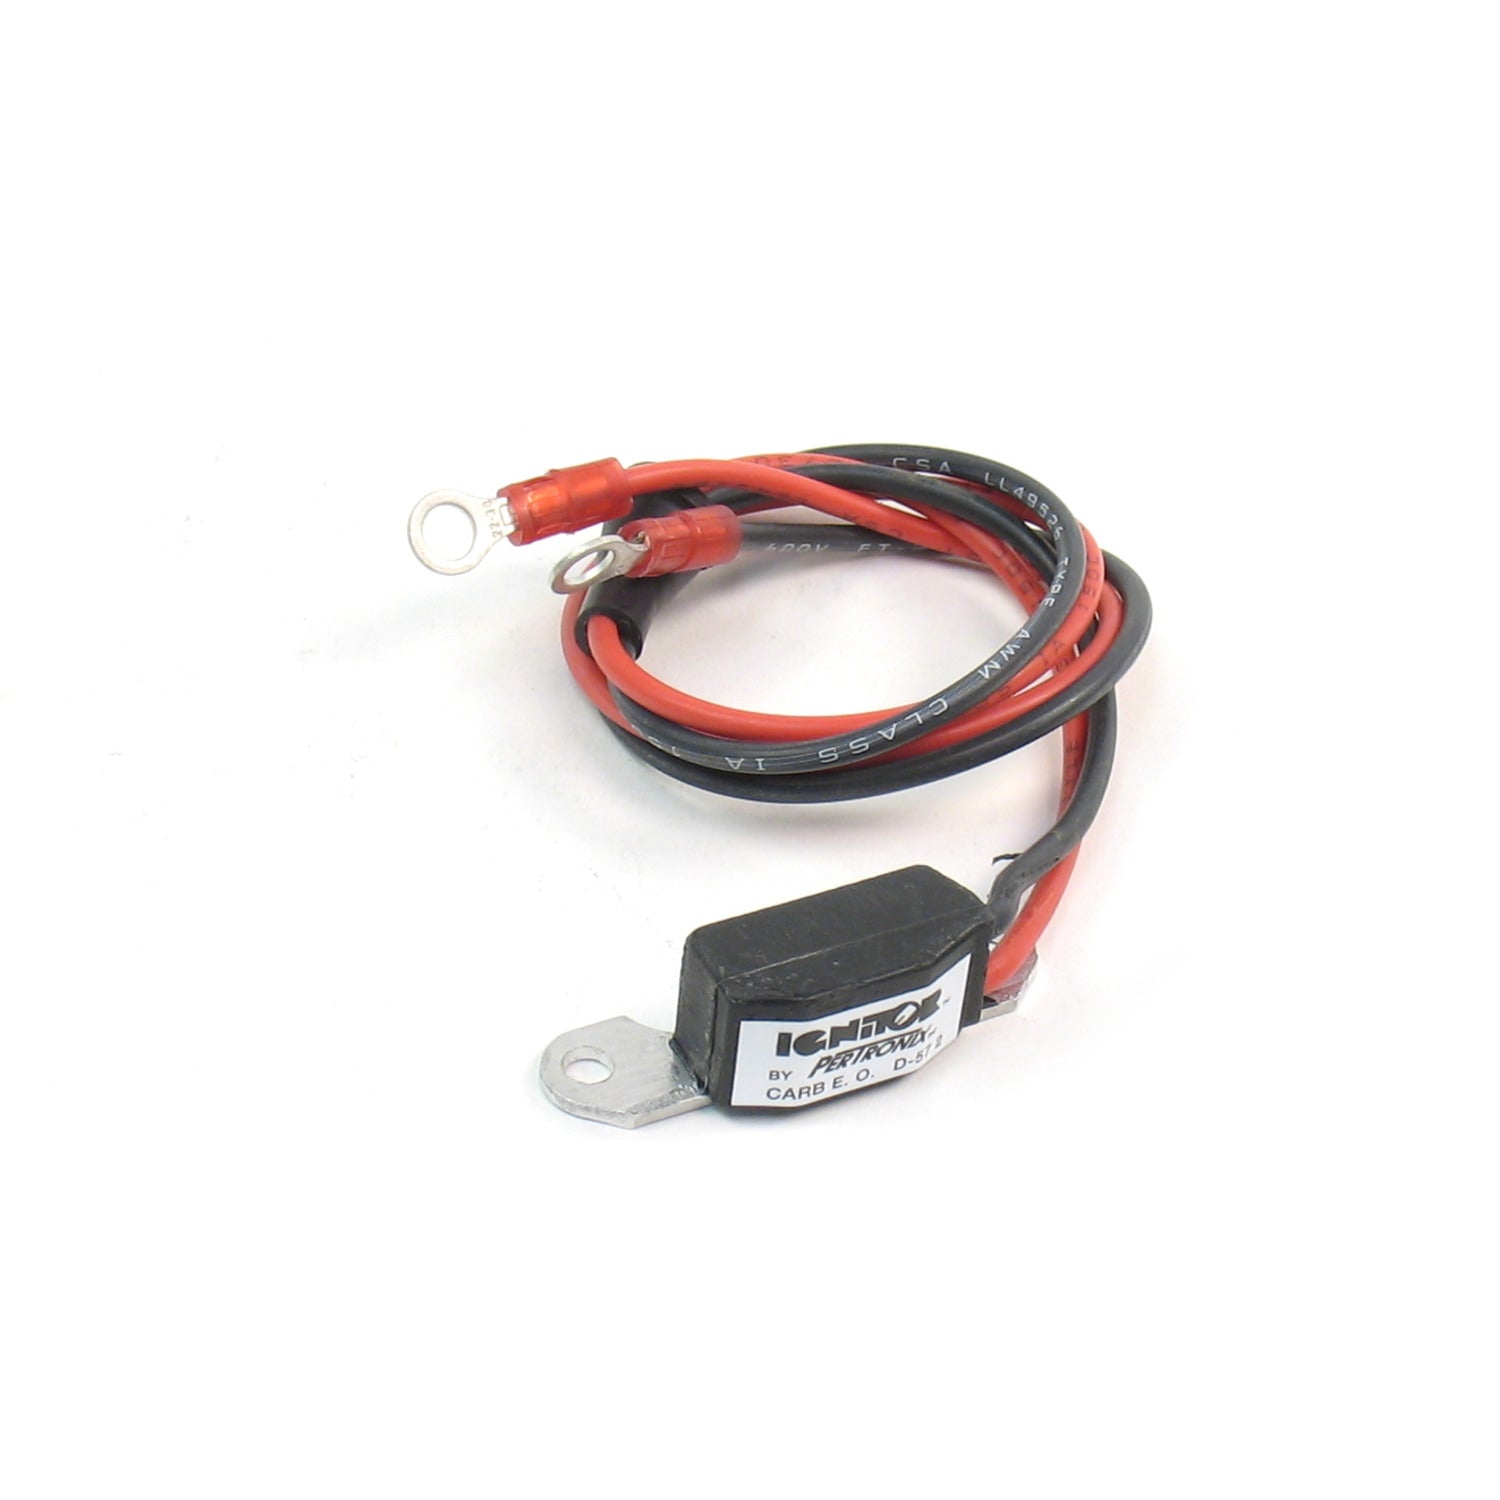 PerTronix D500715 Module (replacement) Ignitor for PerTronix Flame-Thrower Chevy Cast Distributor